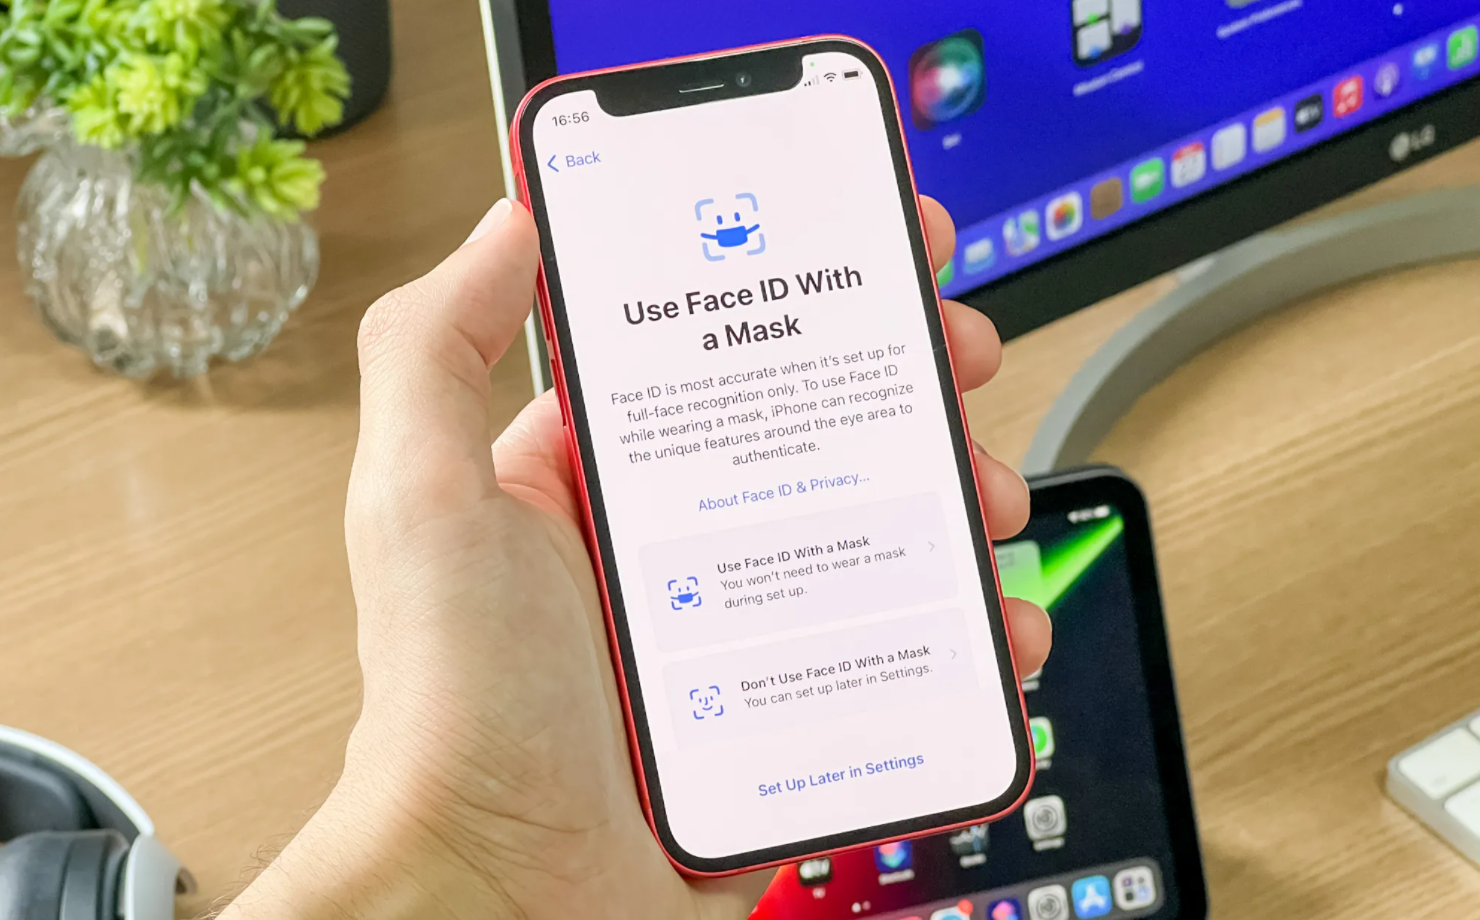 Apple will finally allow users to unlock their iPhones using Face ID with a mask on. Image credit: 9to5 Mac